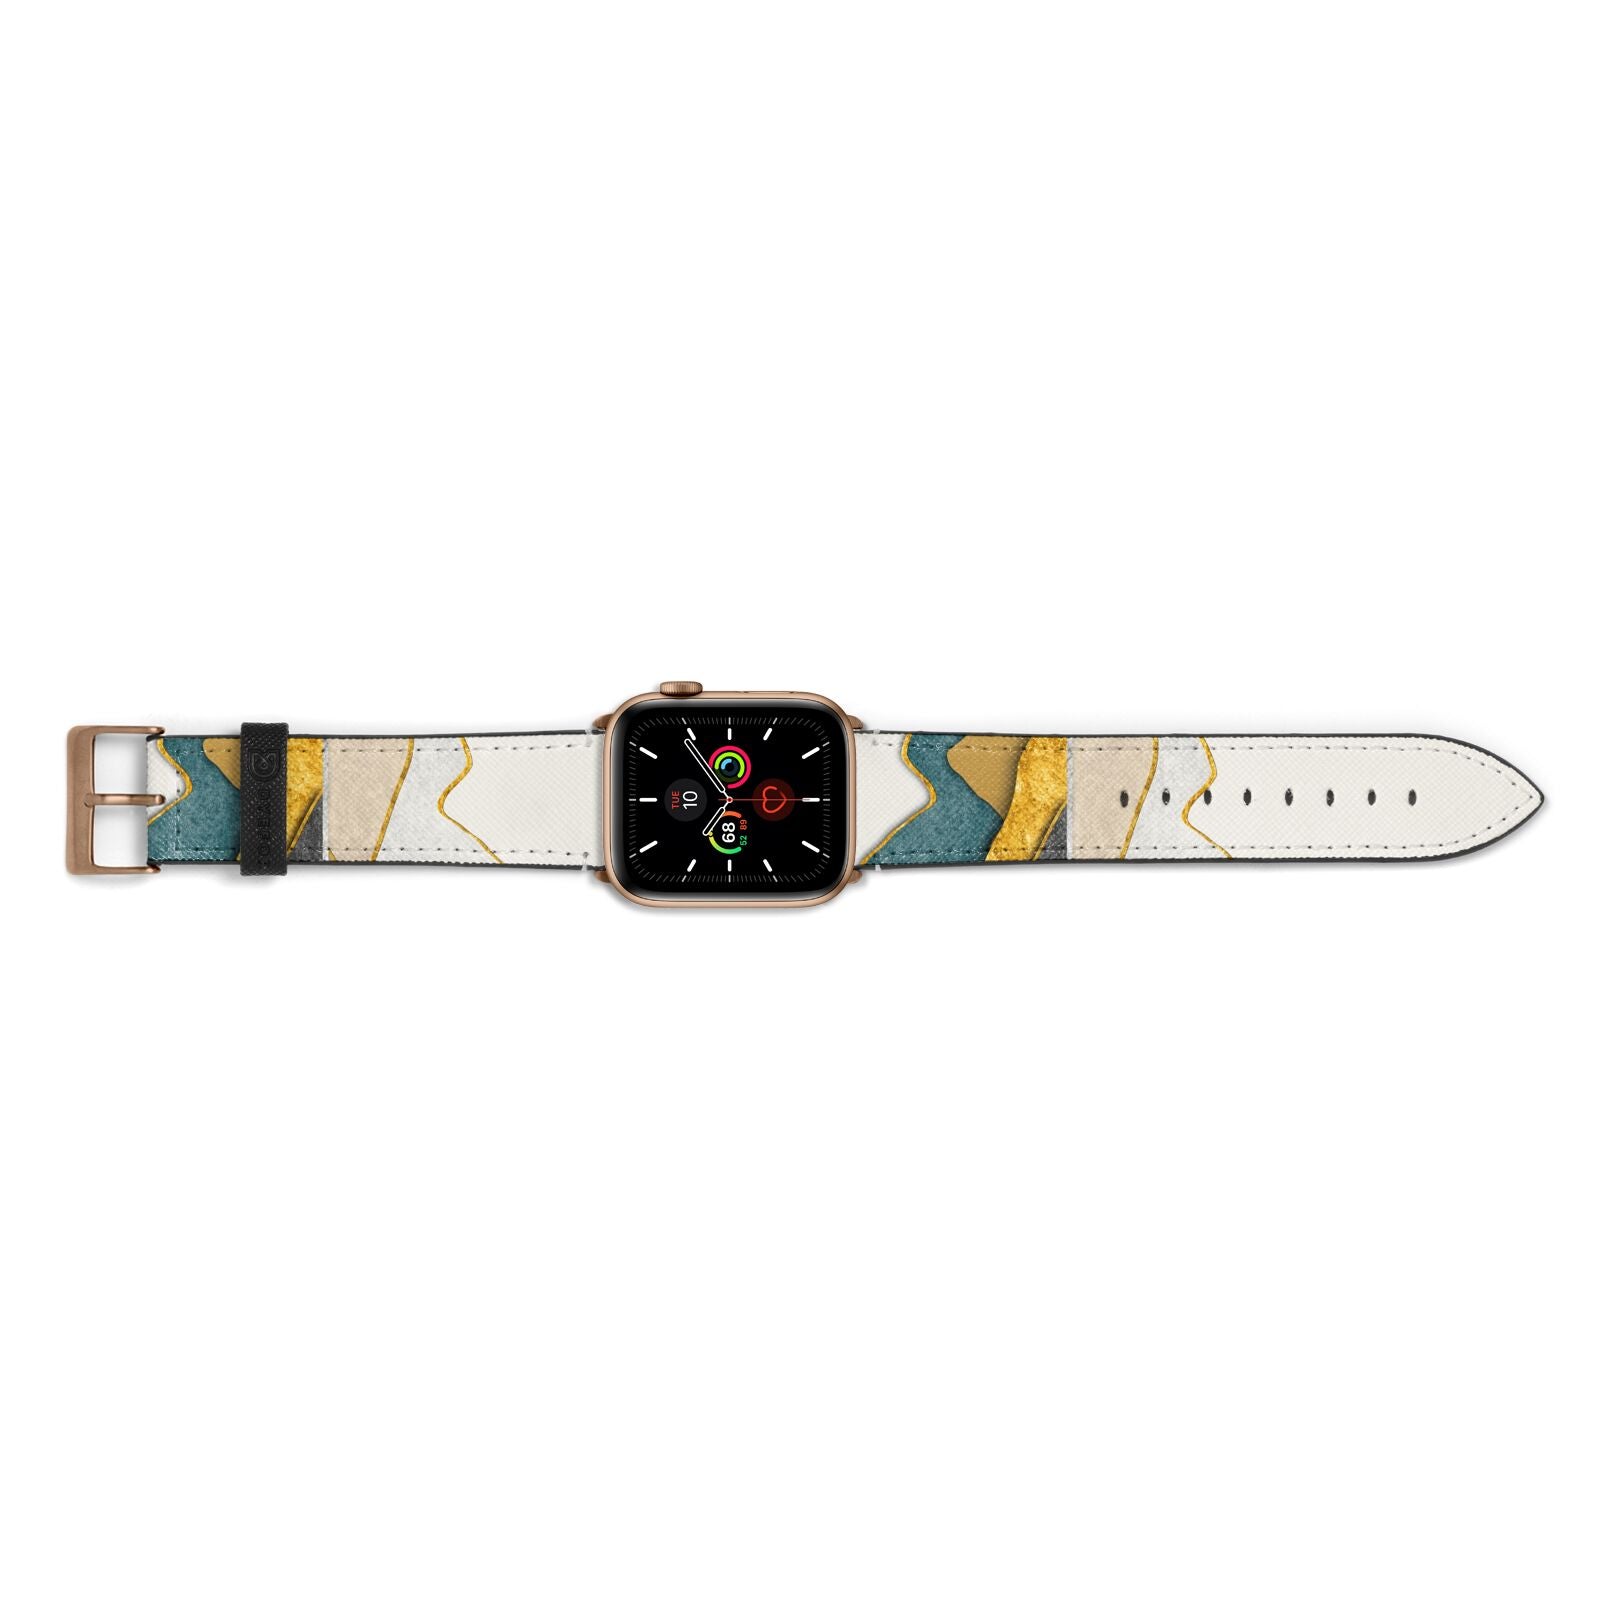 Abstract Mountain Apple Watch Strap Landscape Image Gold Hardware